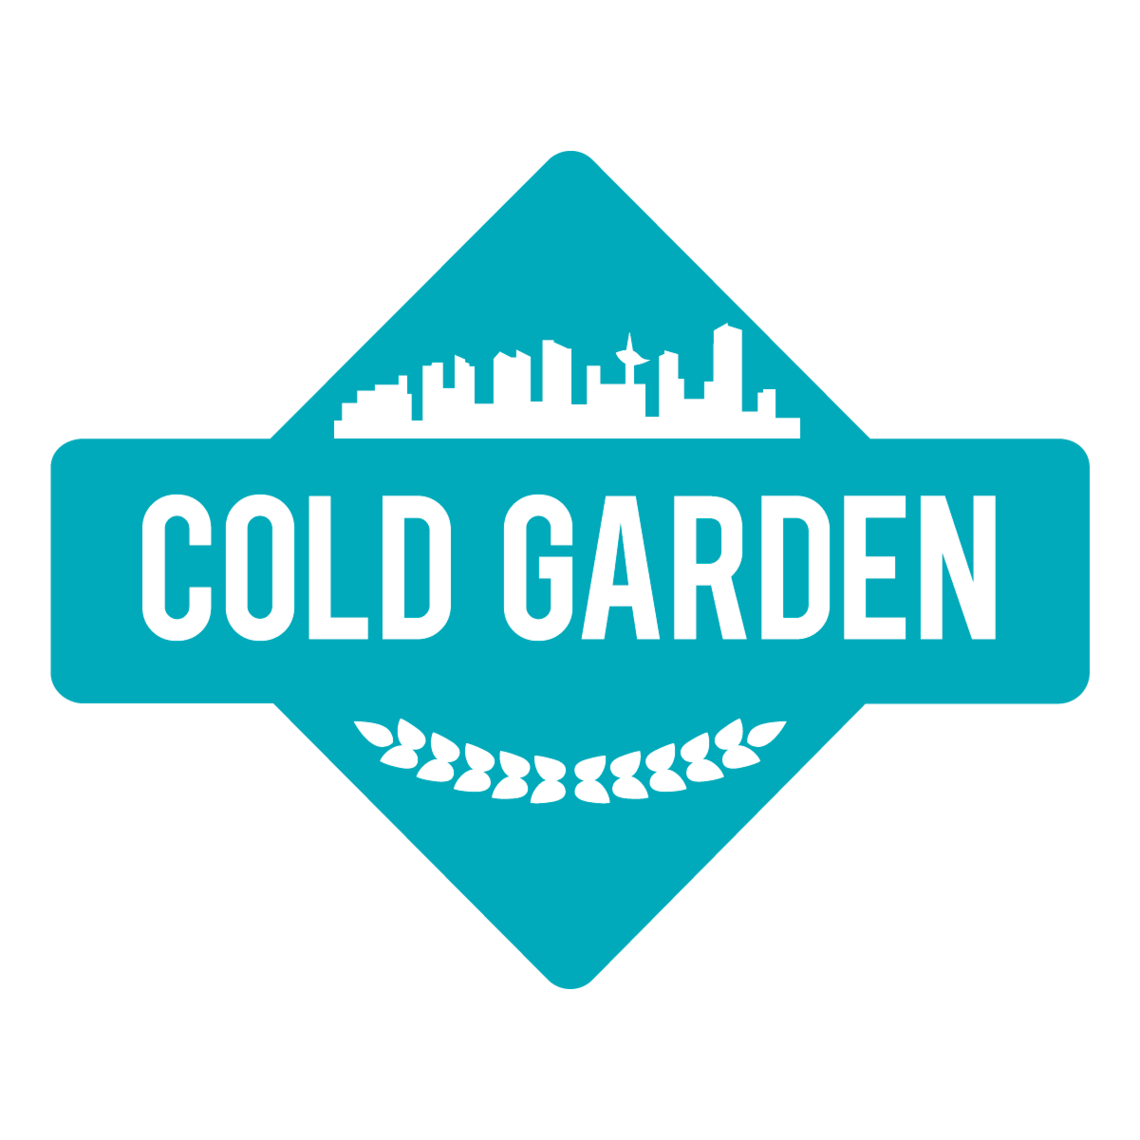 A blue logo with white writing that says "Cold Garden" and that has a white silhouette of the Calgary cityscape above it and a ribbon of hops along the bottom. 